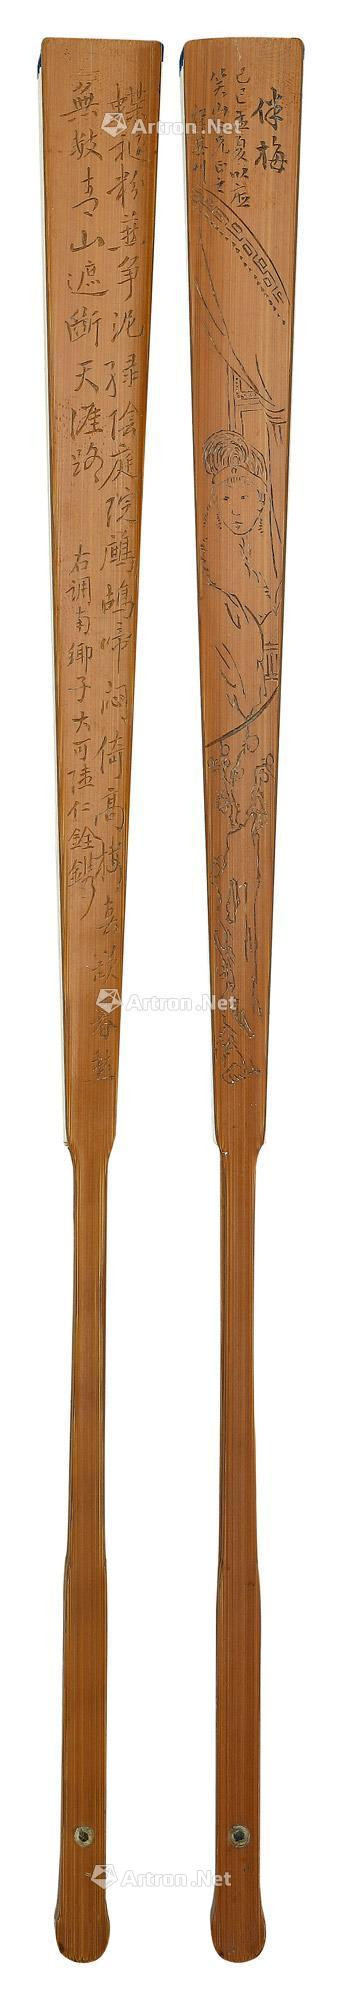 A BAMBOO CARVED ‘LADY AND CALLIGRAPHY IN RUNNING SCRIPT’ BY XIANG QI AND LU RENQUAN